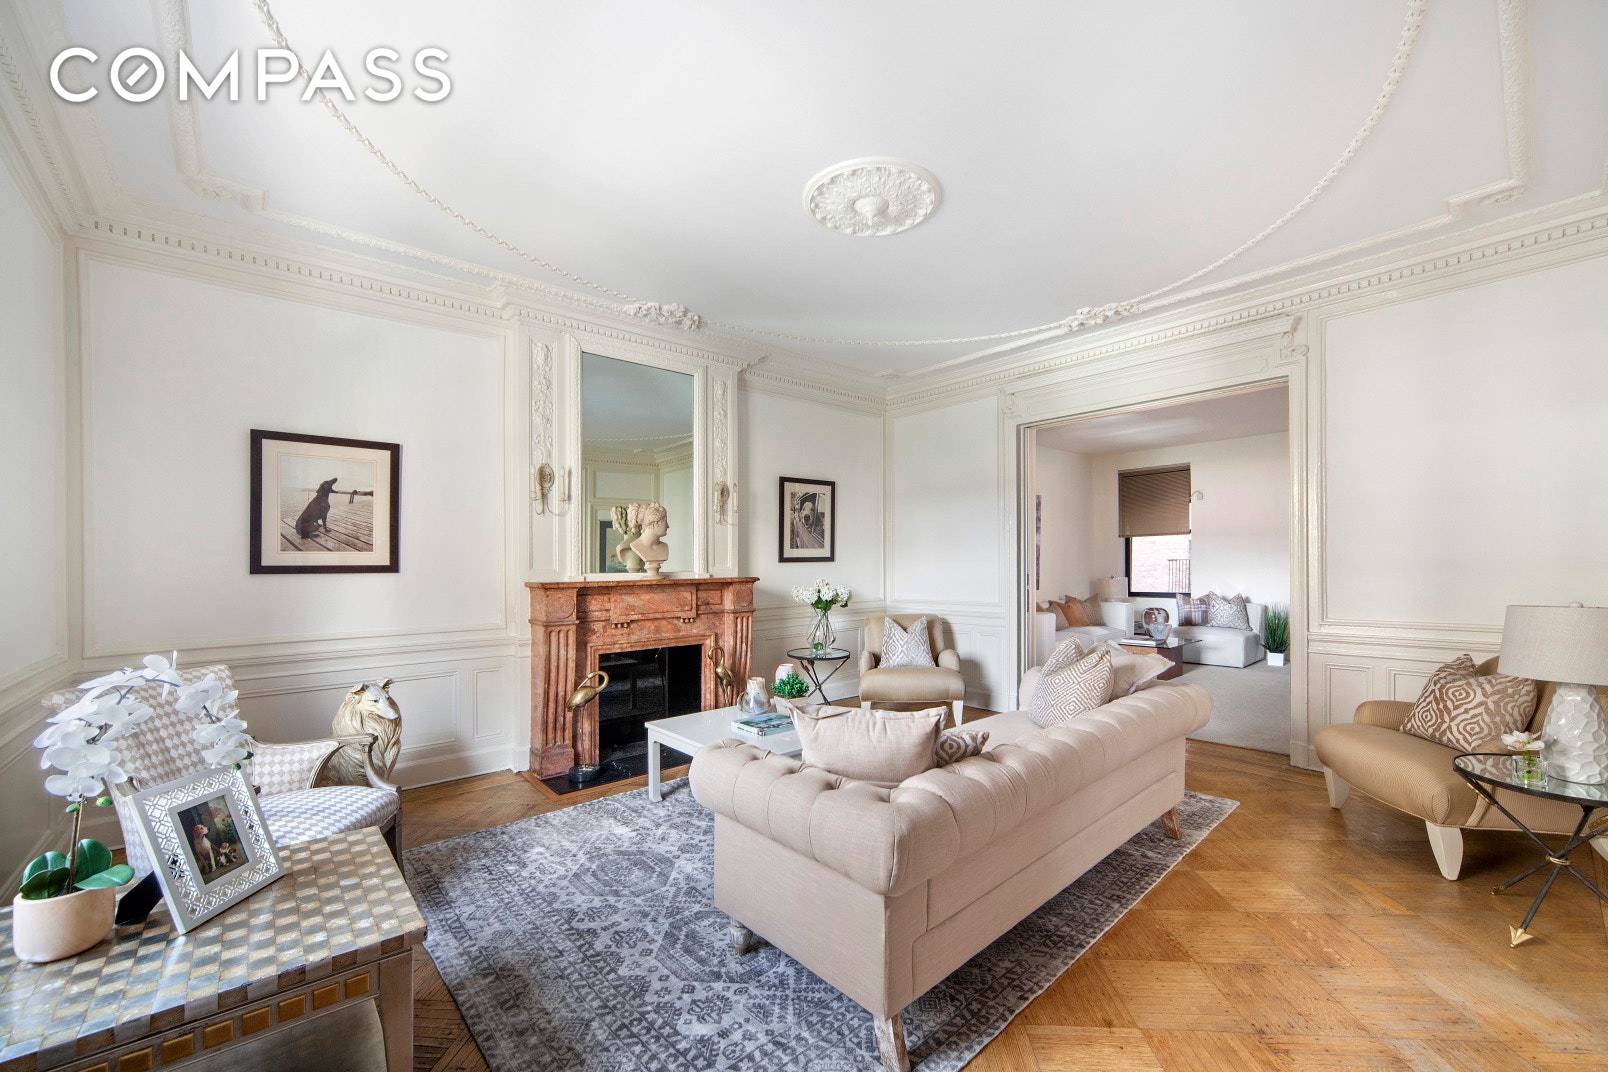 This exquisite prewar apartment is on the market for the first time in 40 years.